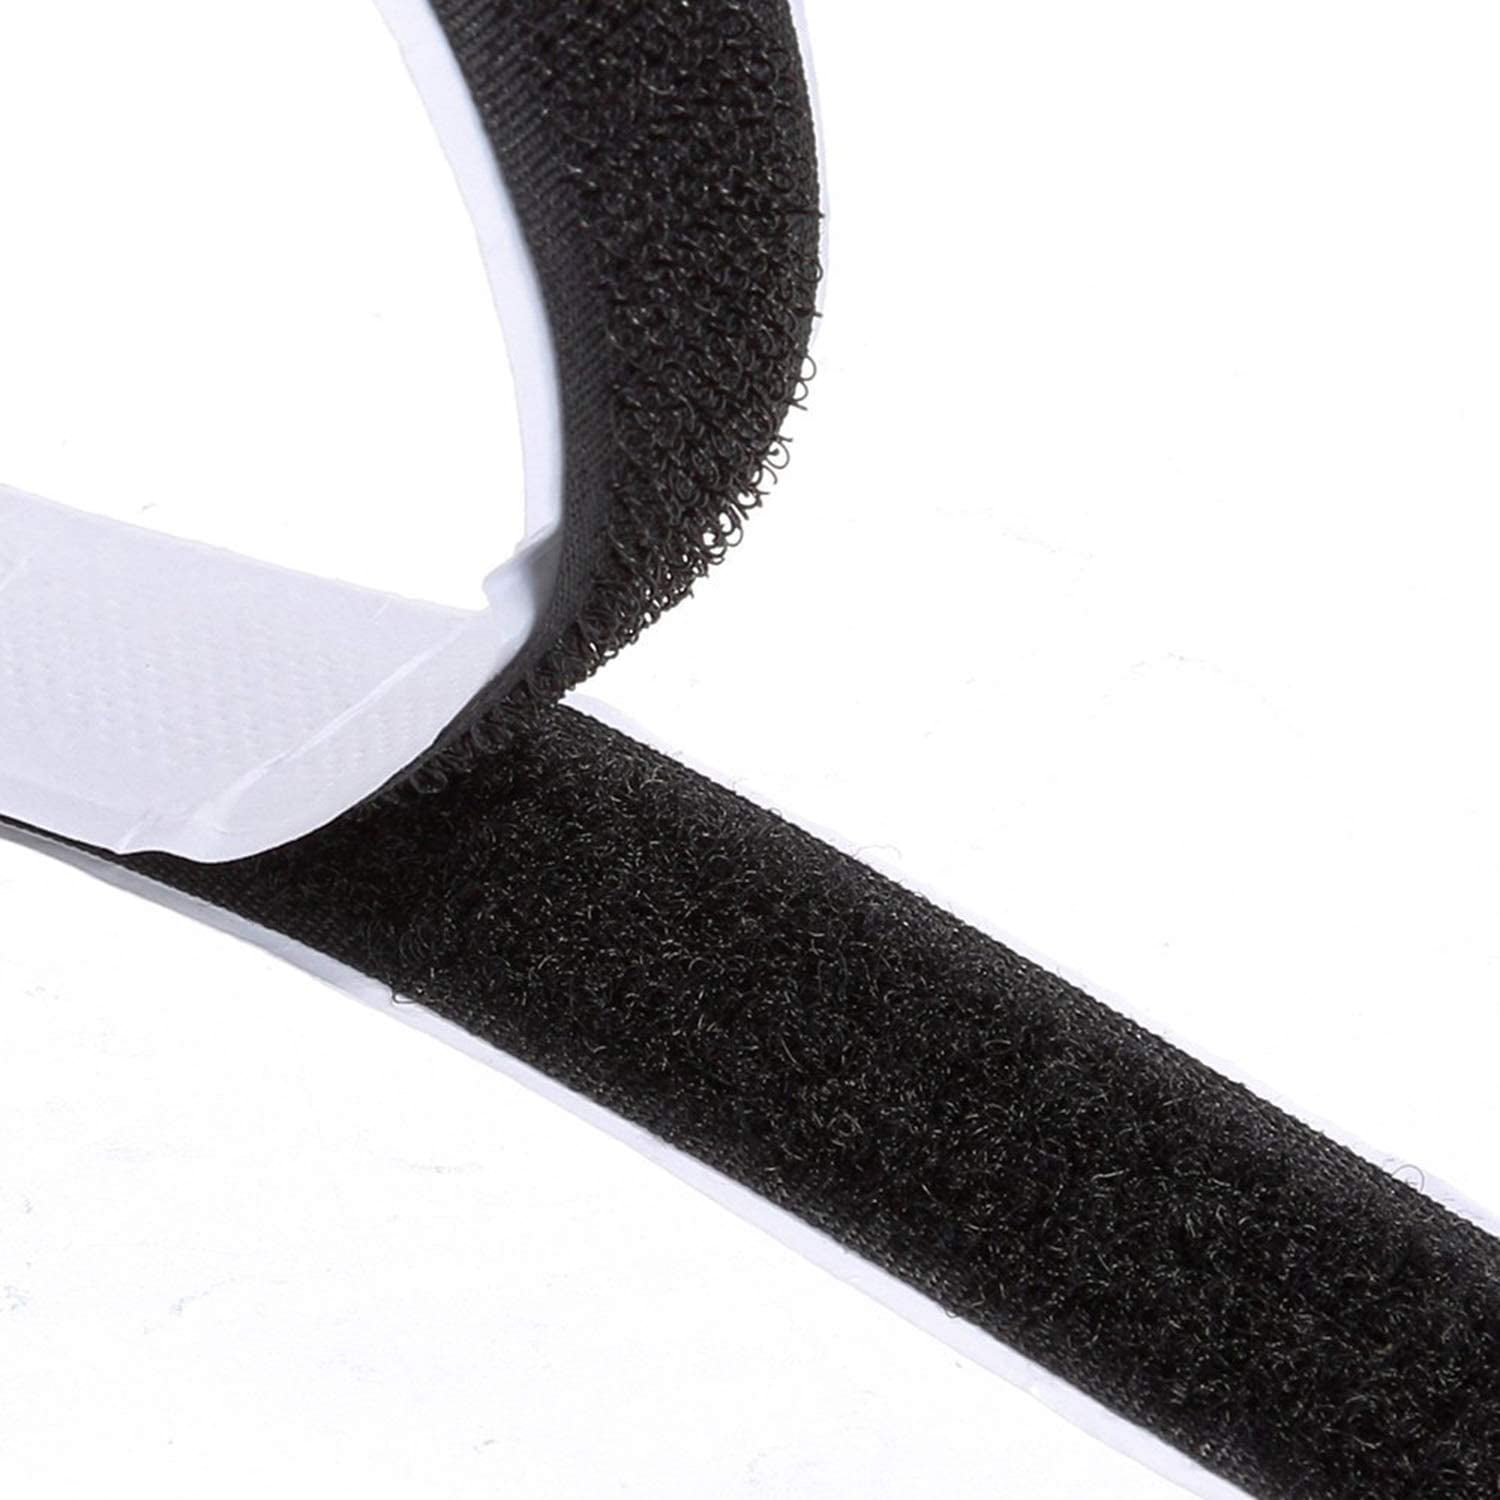 Rudyard Kipling basen Væve 8m Double Sided Tape Extra Strong Self Adhesive Velcro Tape 20mm Wide Black  Sewing School Office Home - Walmart.com